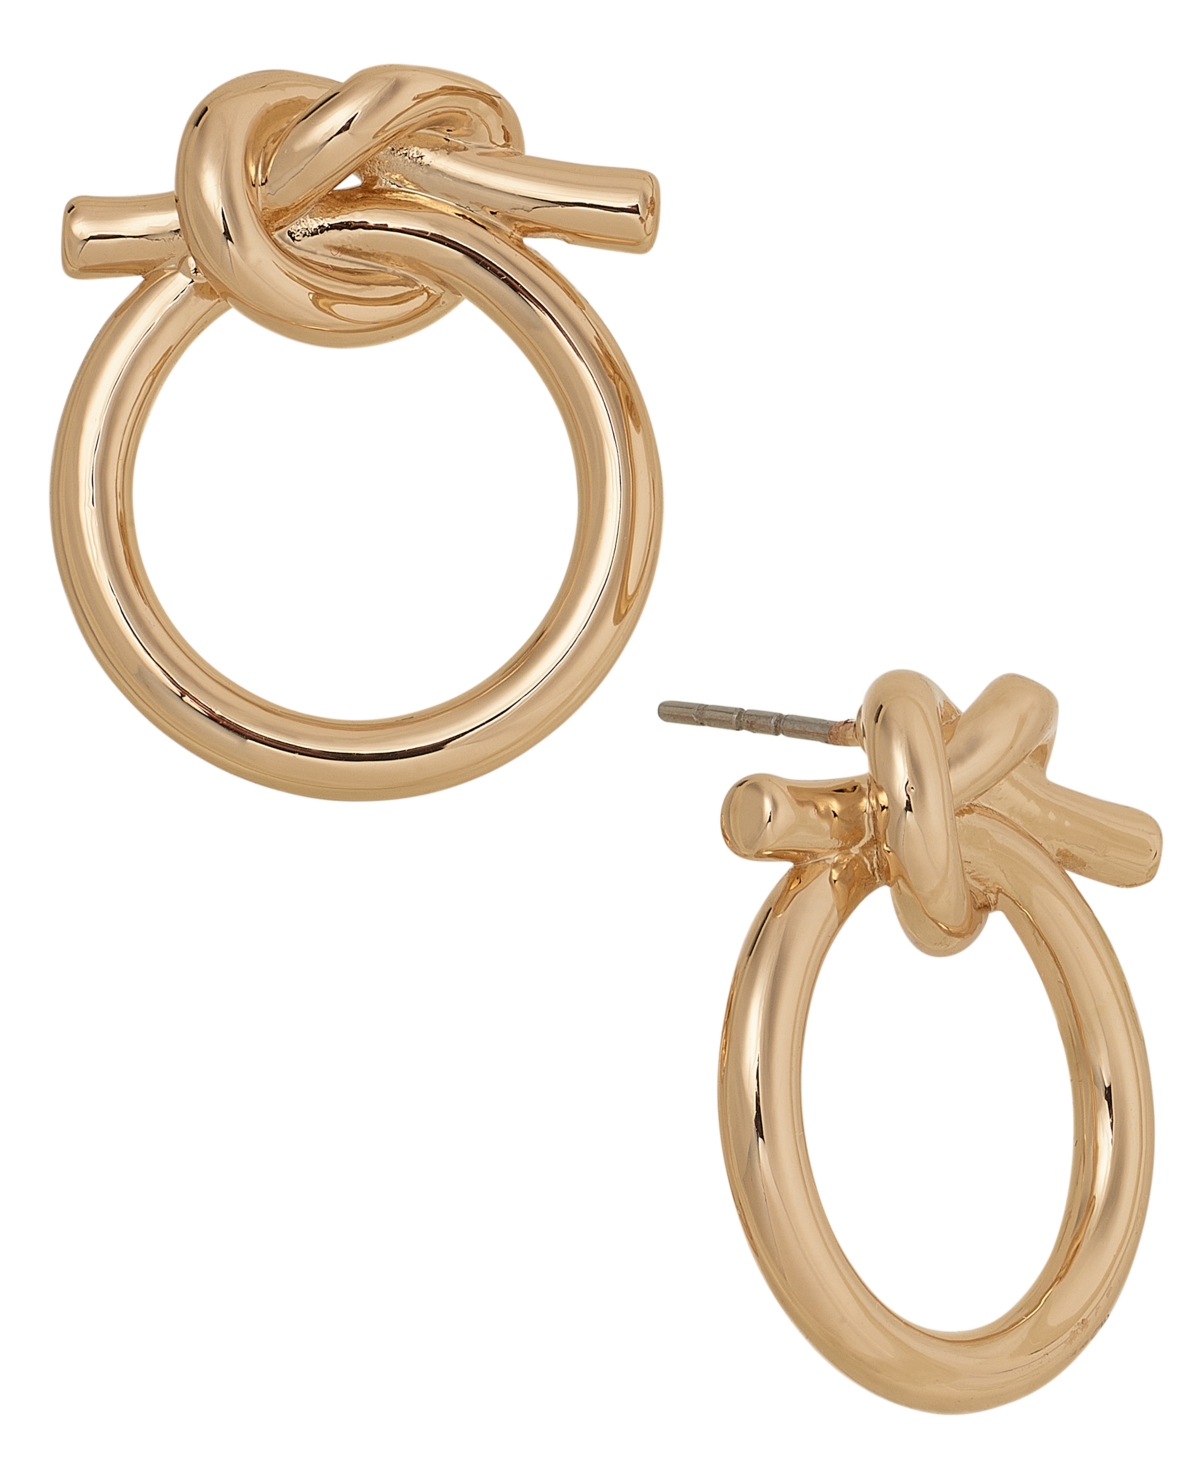 Gold-Tone Knotted Front-Facing Hoop Earrings, Created for Macy's - Gold